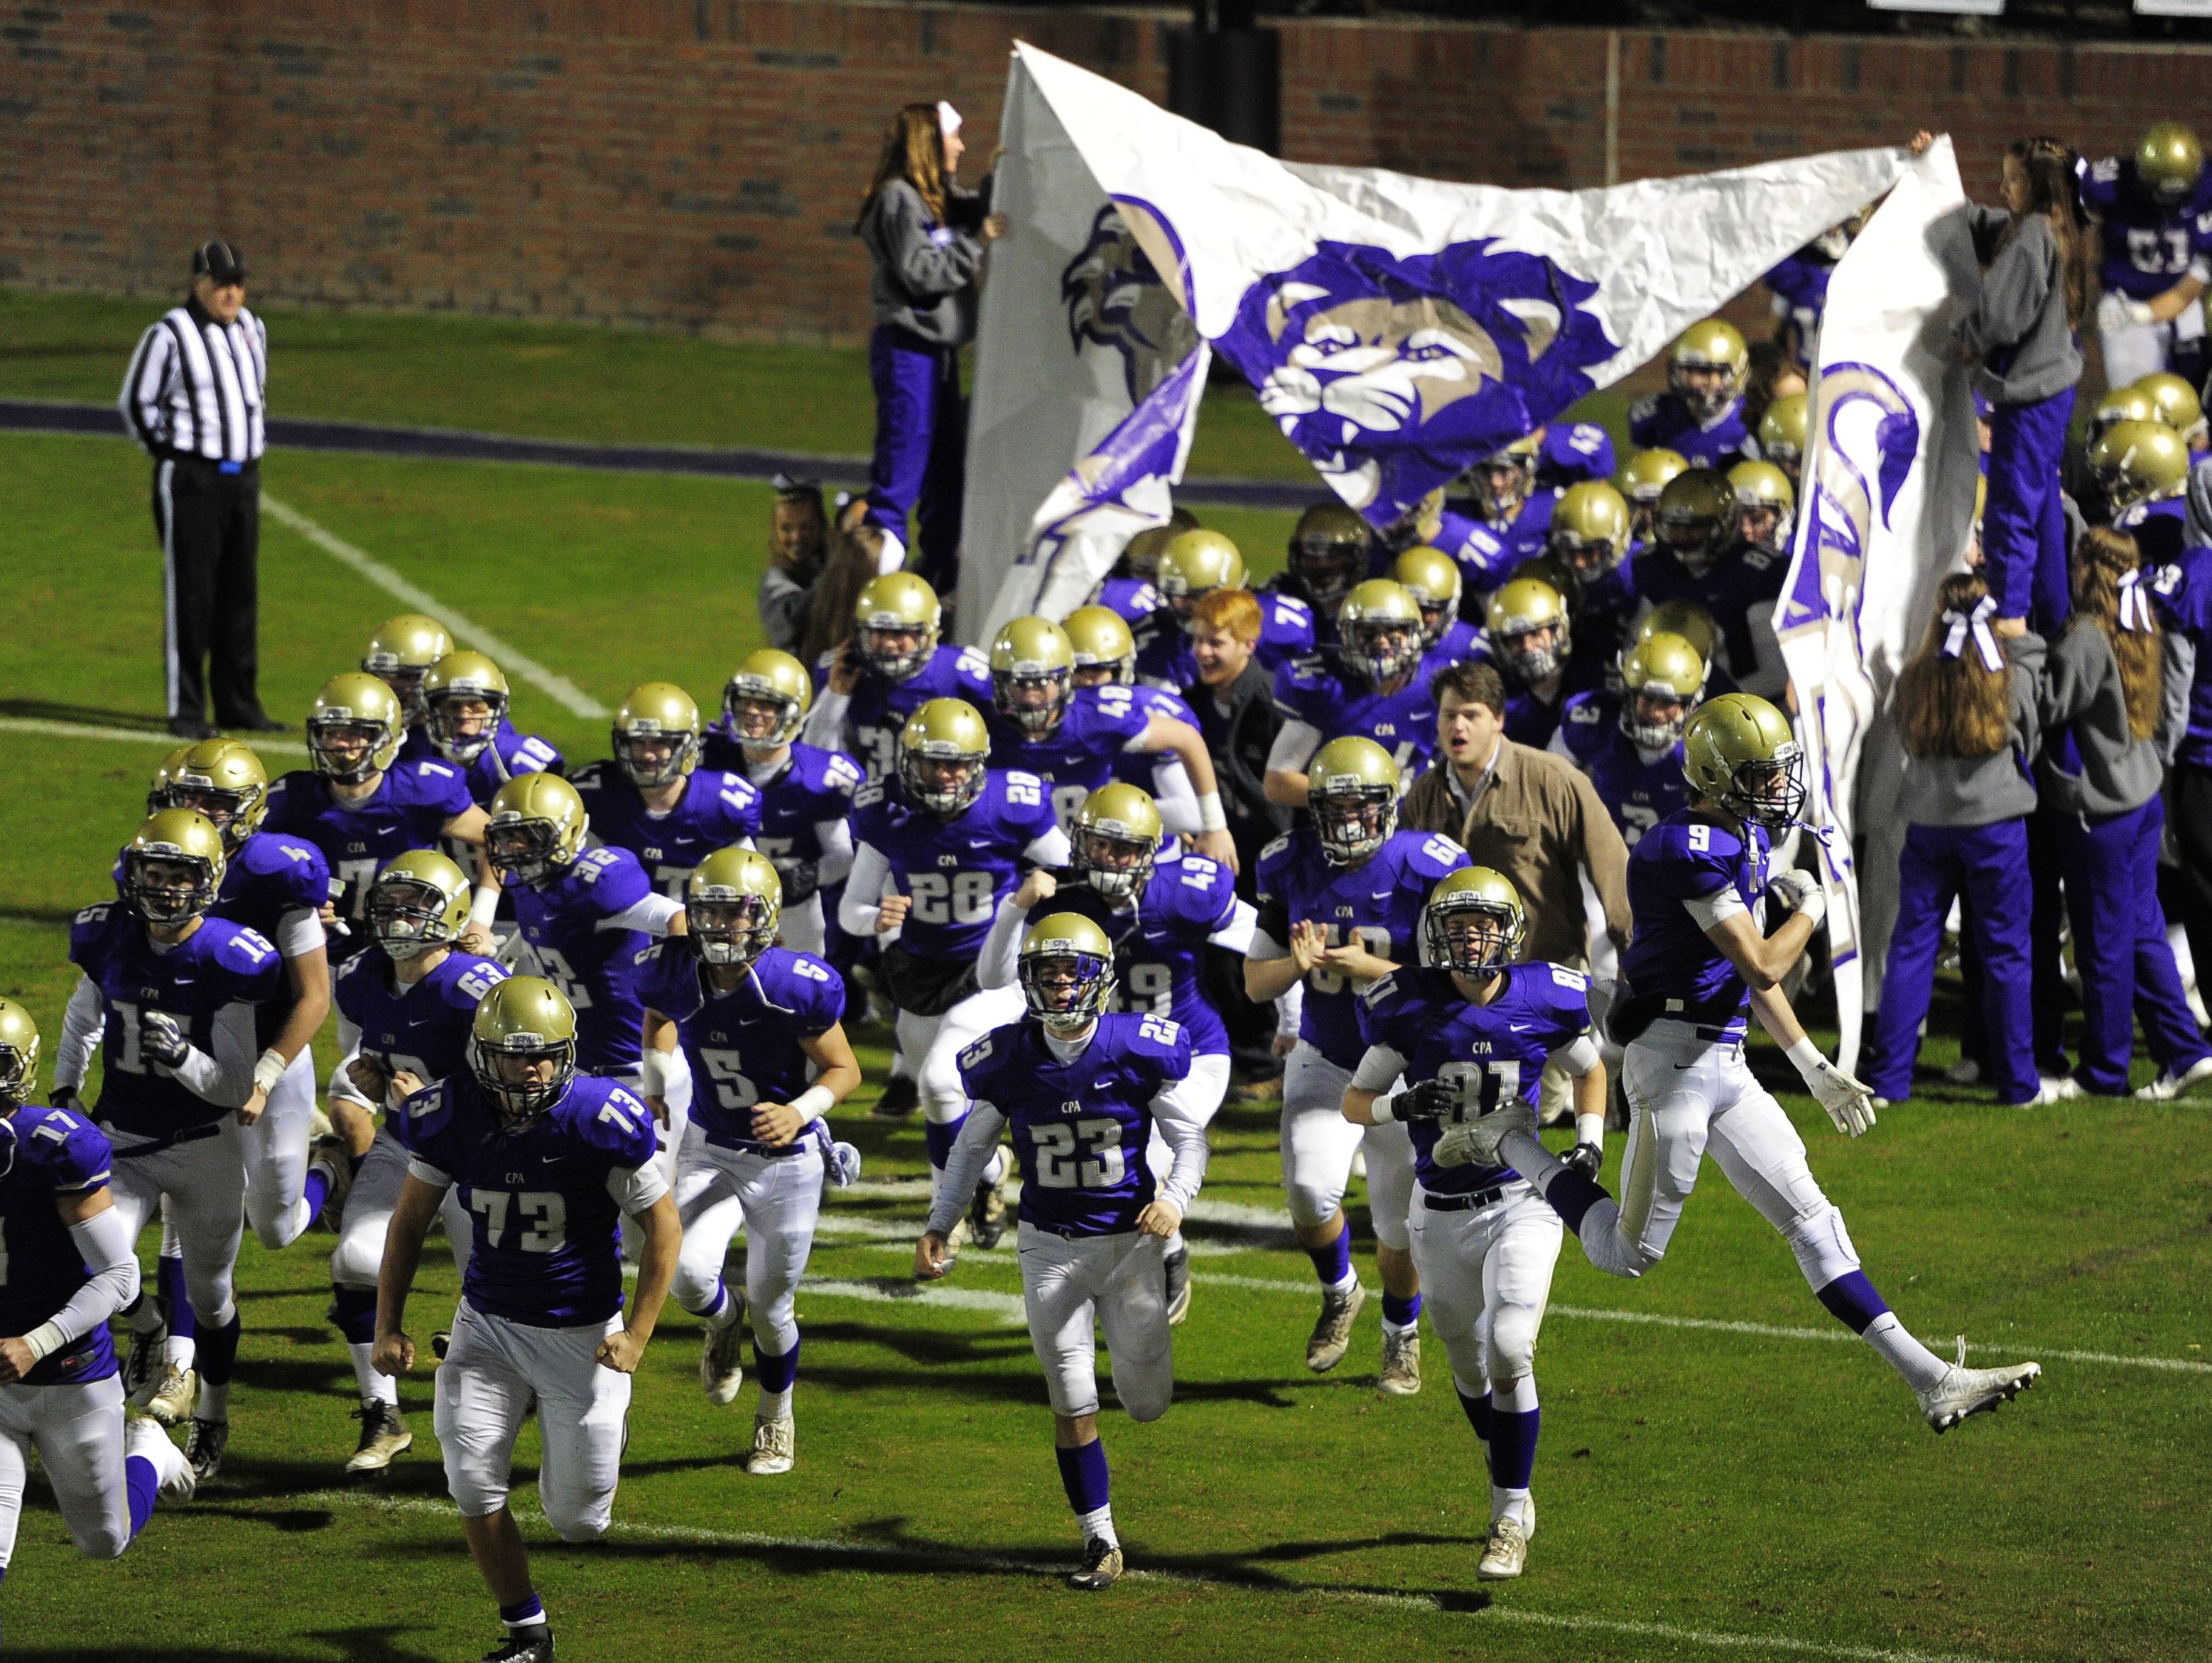 CPA takes the field before the game against Stratford Friday Nov. 13, 2015, in Nashville, Tenn.